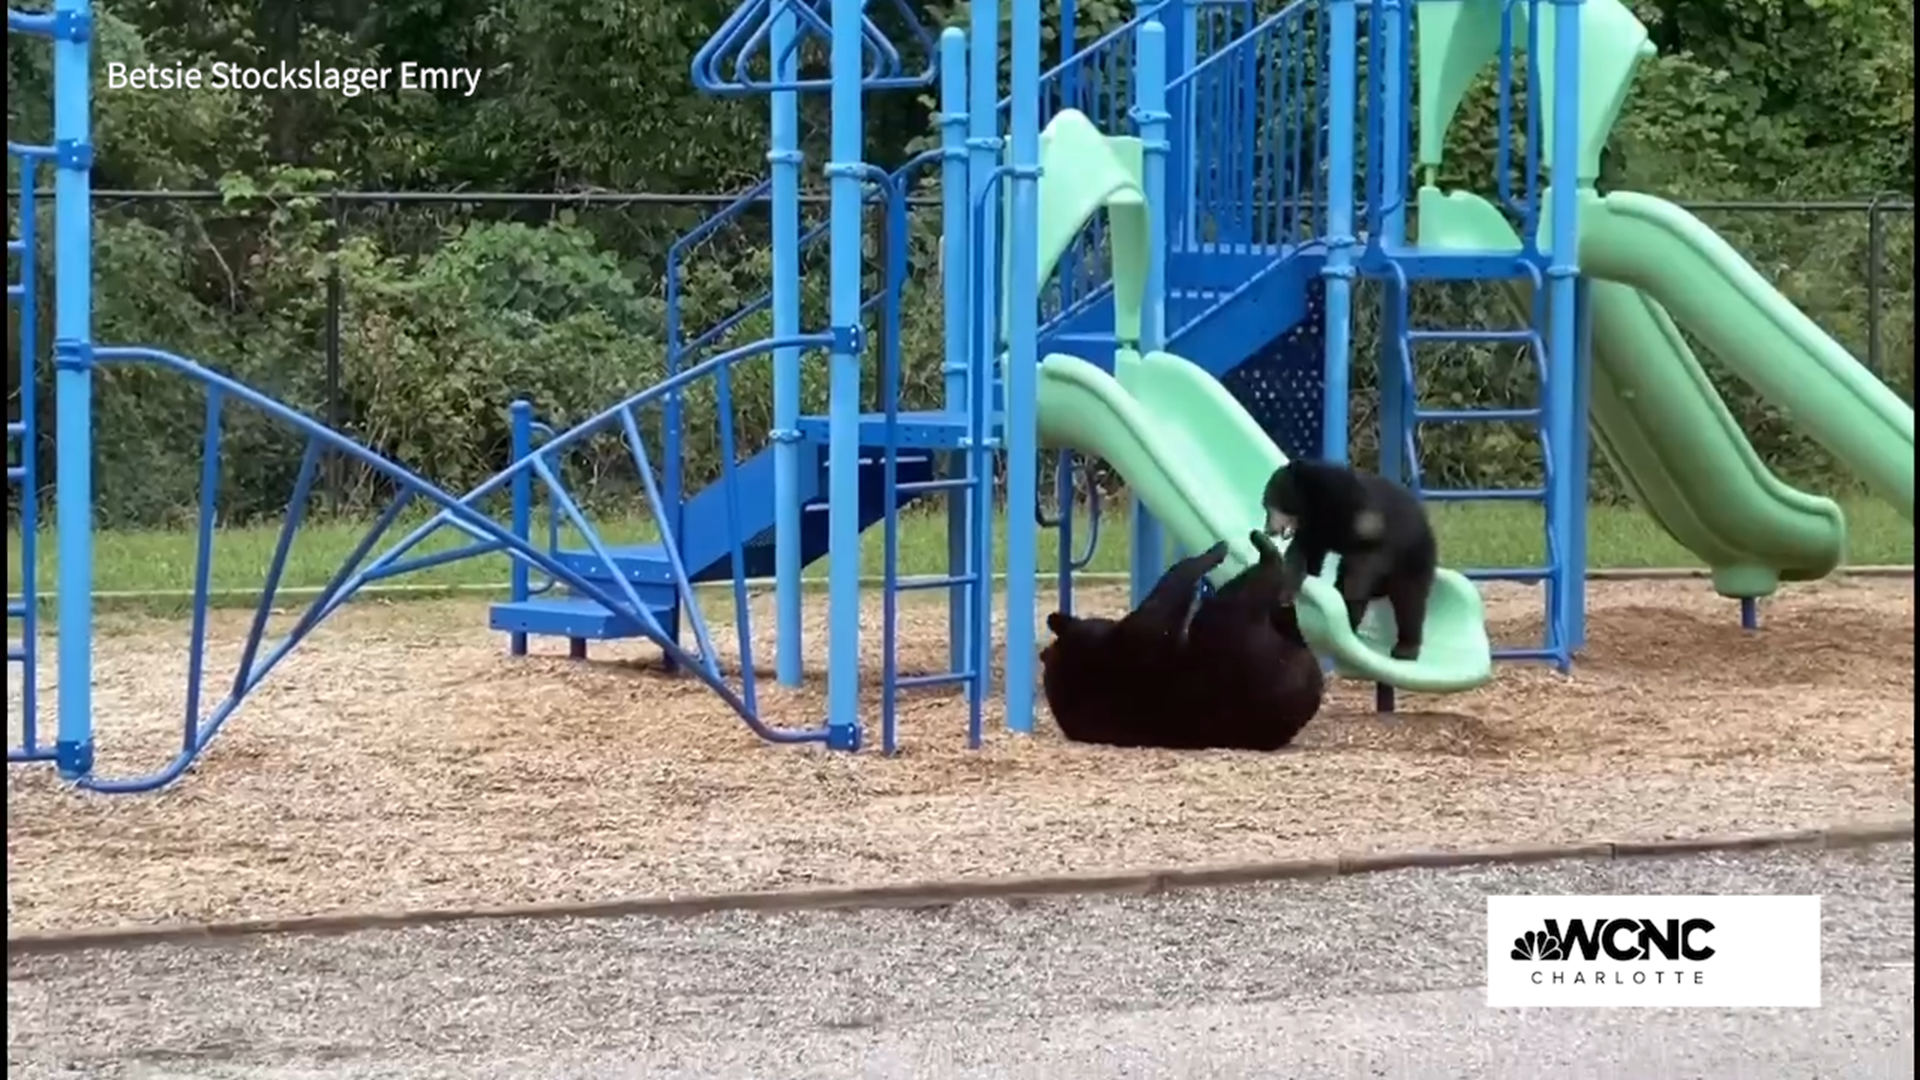 Two bears were seen playing on a school playground at Isaac Dickson Elementary School in Asheville, North Carolina.